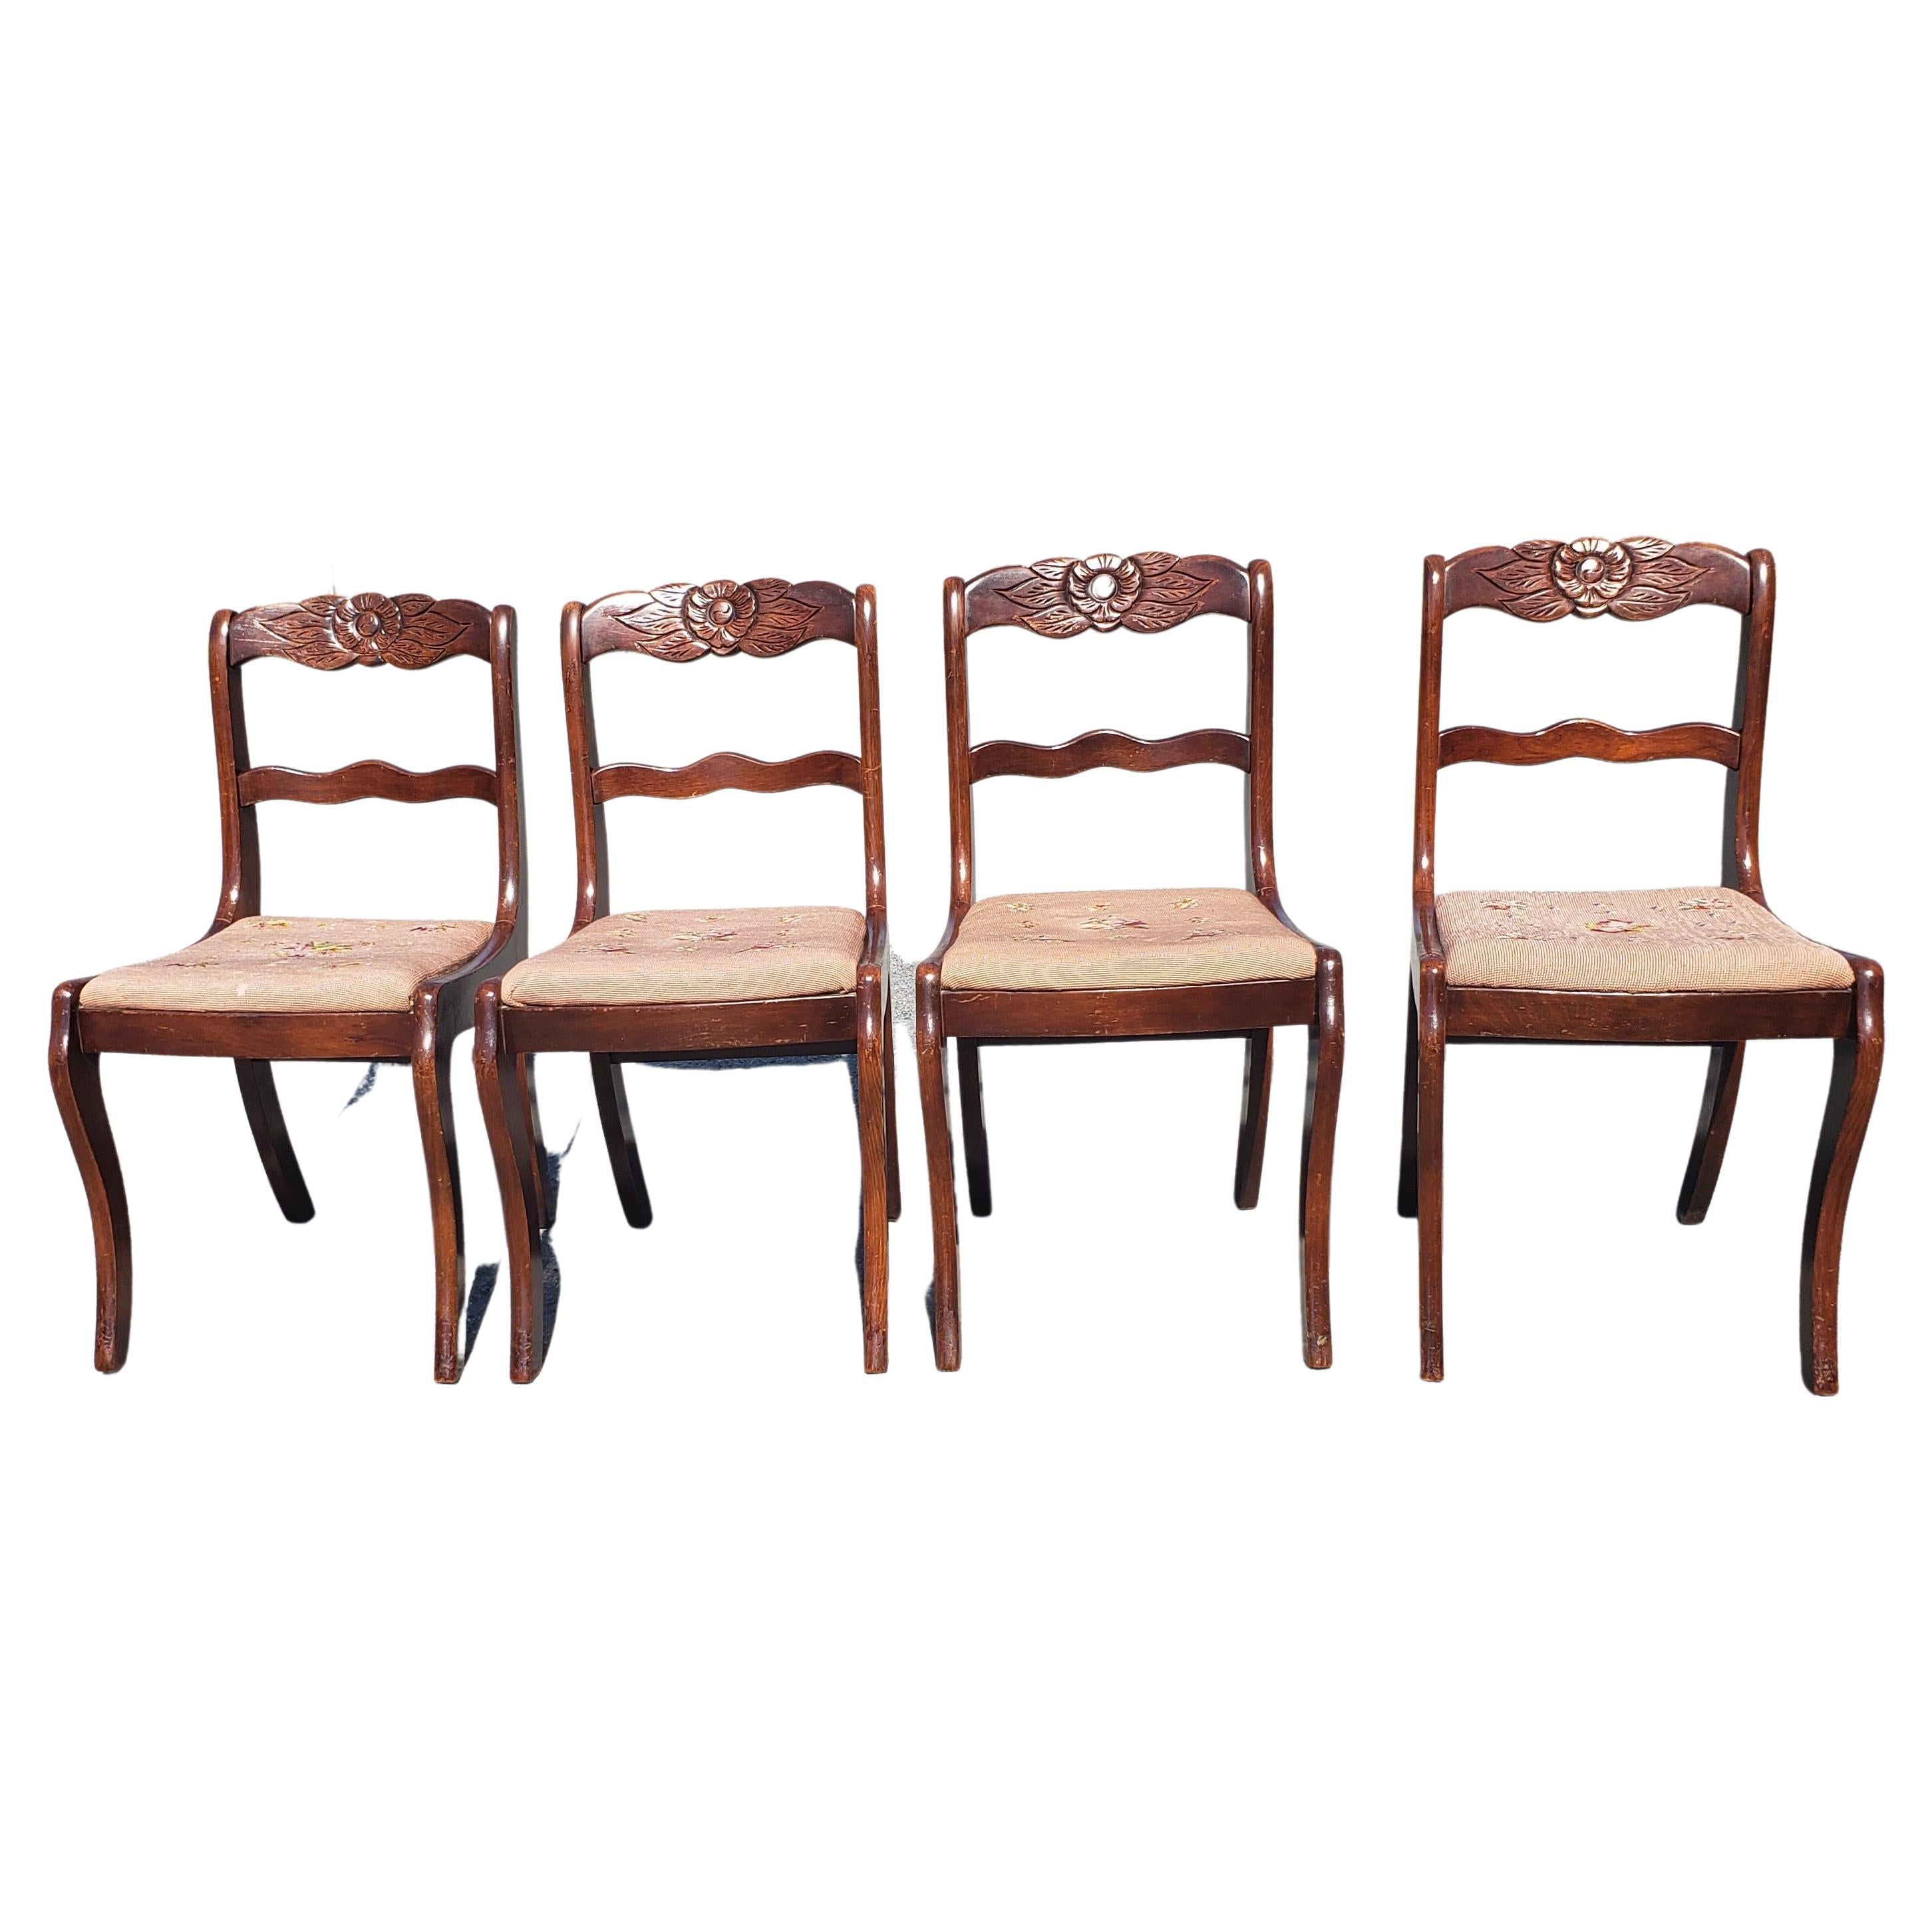 1940’s Tell City Mahogany Duncan Phyfe Rose Chair W/ Needlepoint Seat, Set of 4 In Good Condition In Germantown, MD